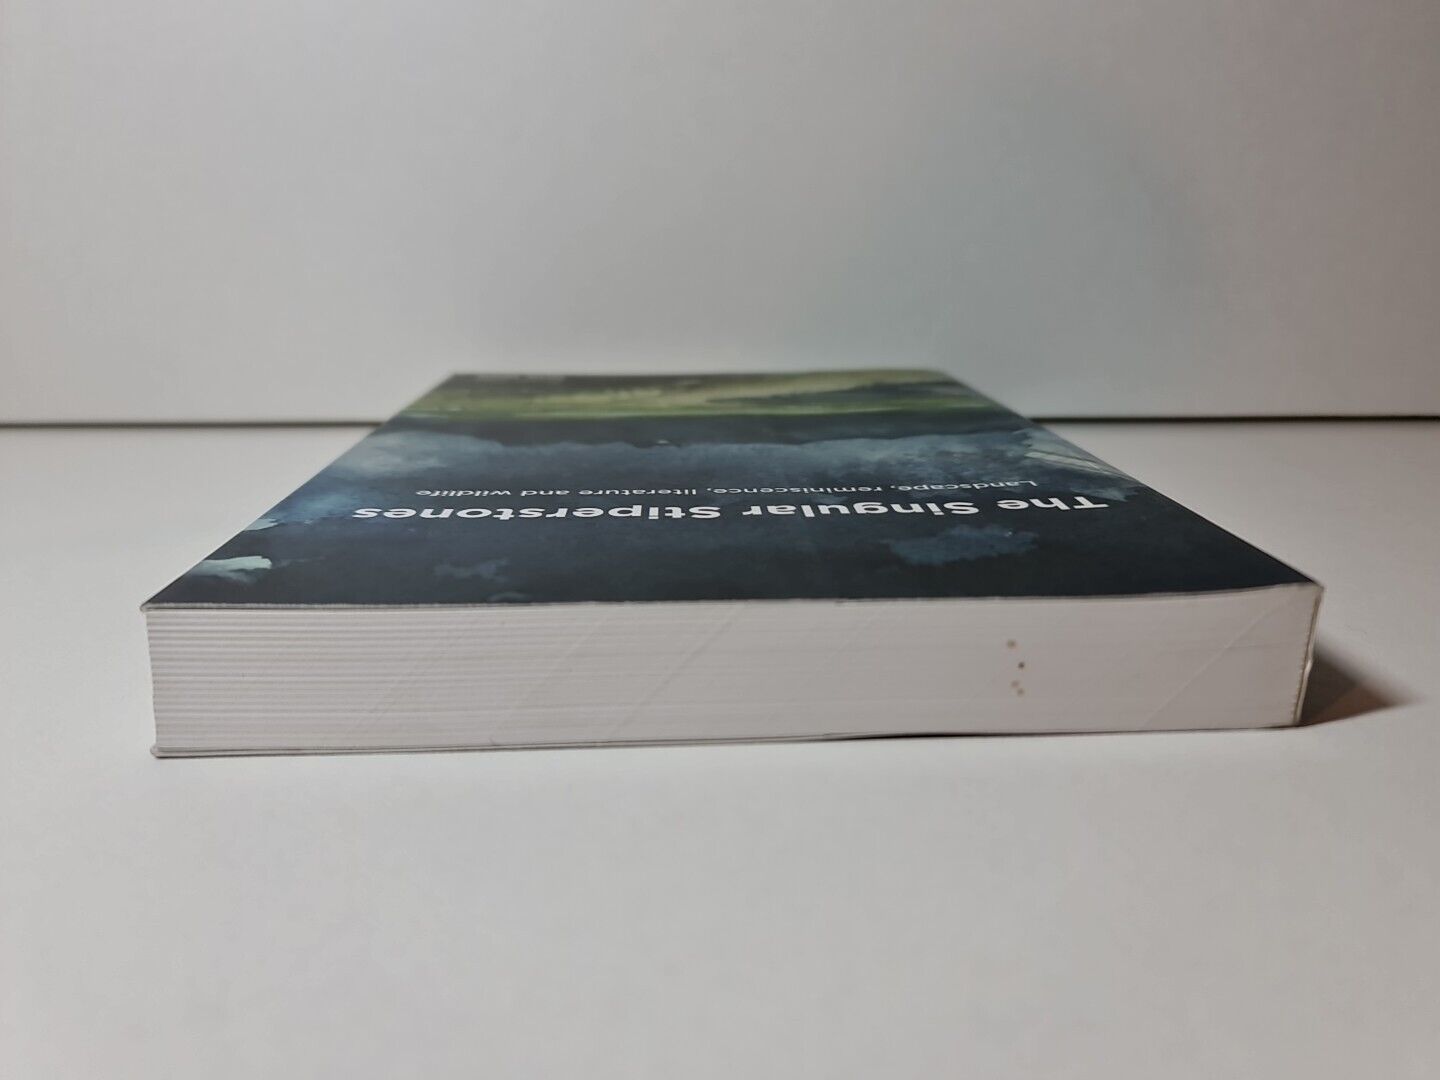 SIGNED - The Singular Stiperstones by Tom Wall (2014)